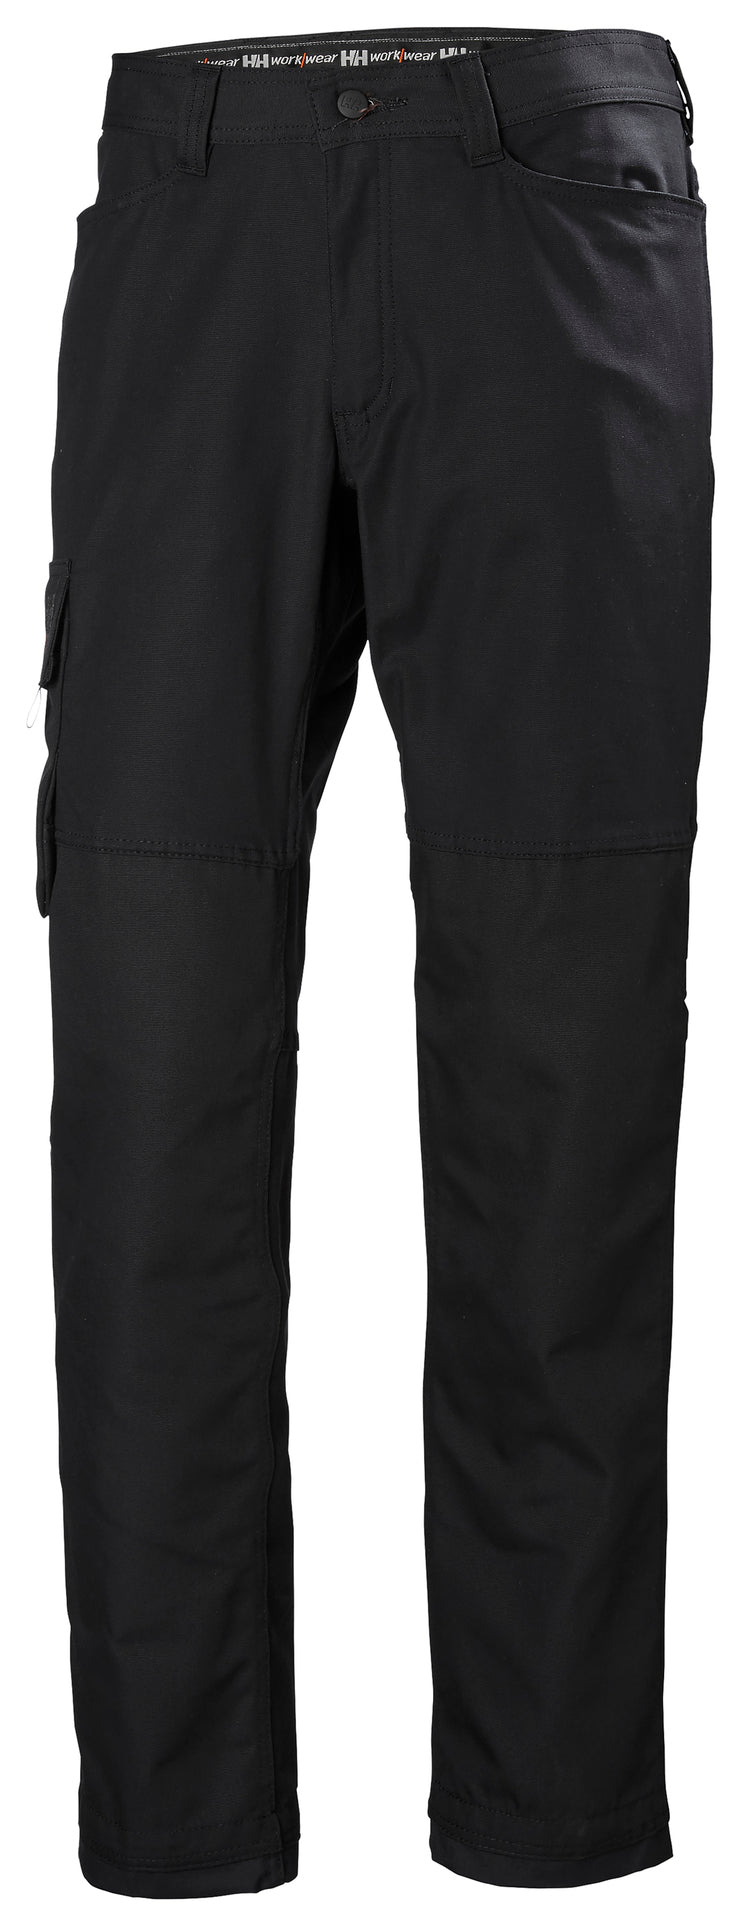 Helly Hansen Oxford Service Trousers - Black